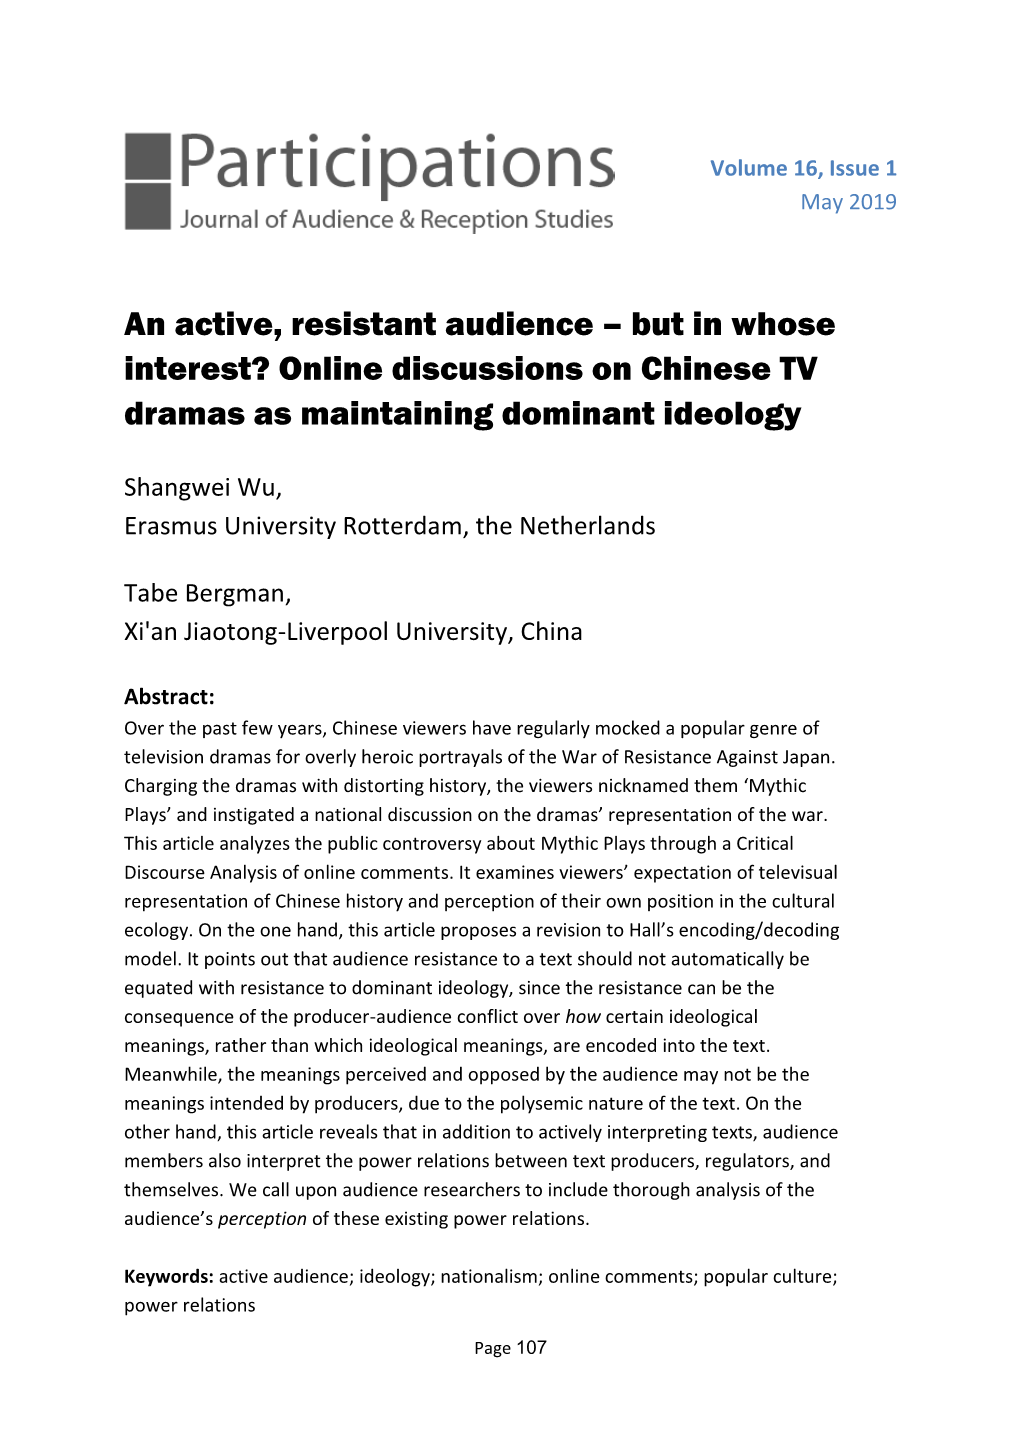 An Active, Resistant Audience – but in Whose Interest? Online Discussions on Chinese TV Dramas As Maintaining Dominant Ideology